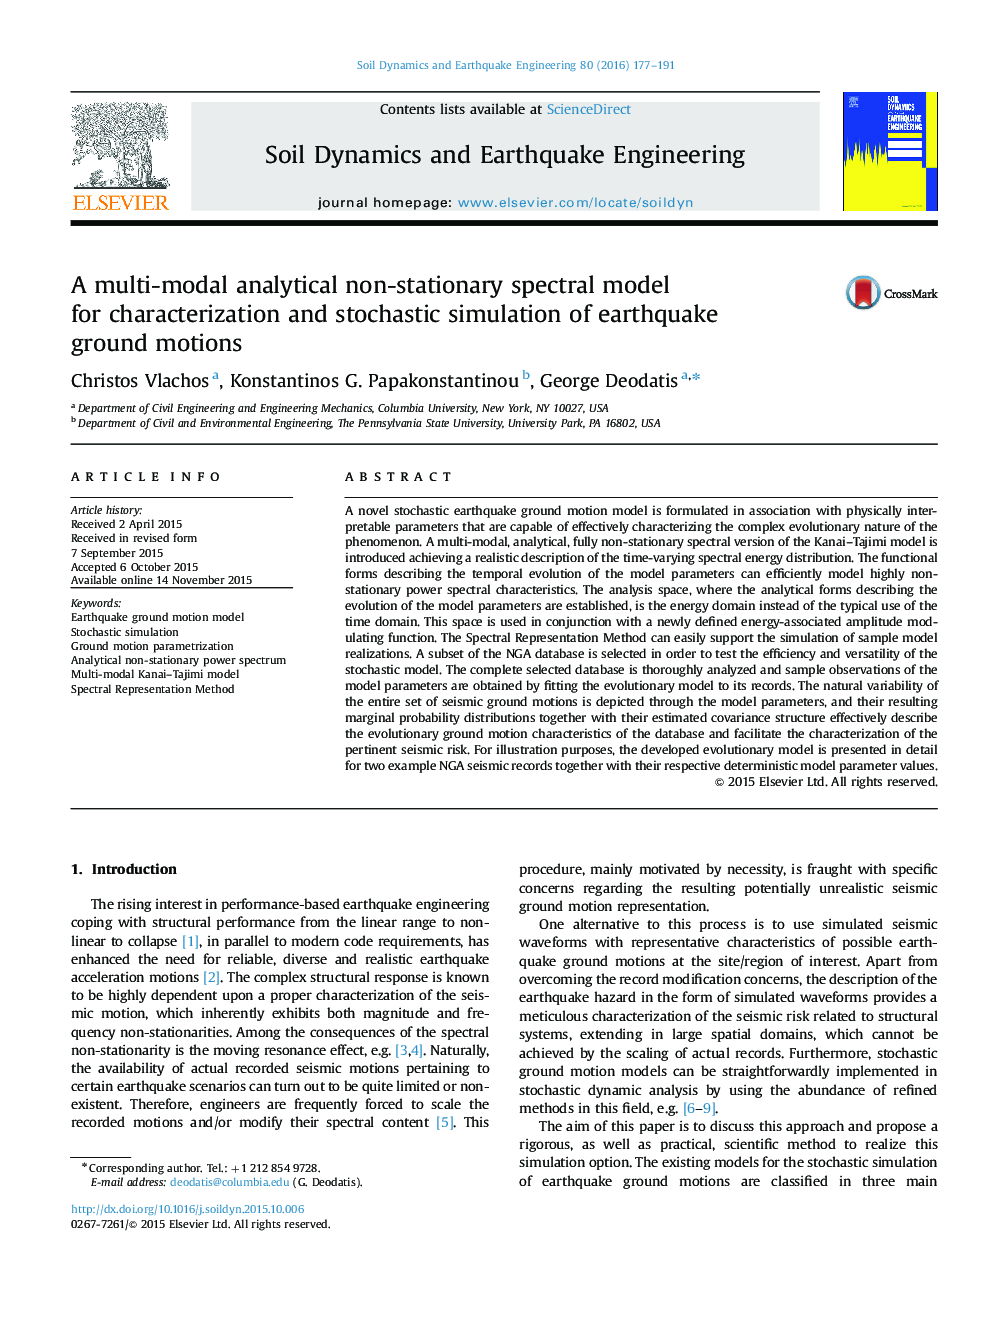 A multi-modal analytical non-stationary spectral model for characterization and stochastic simulation of earthquake ground motions